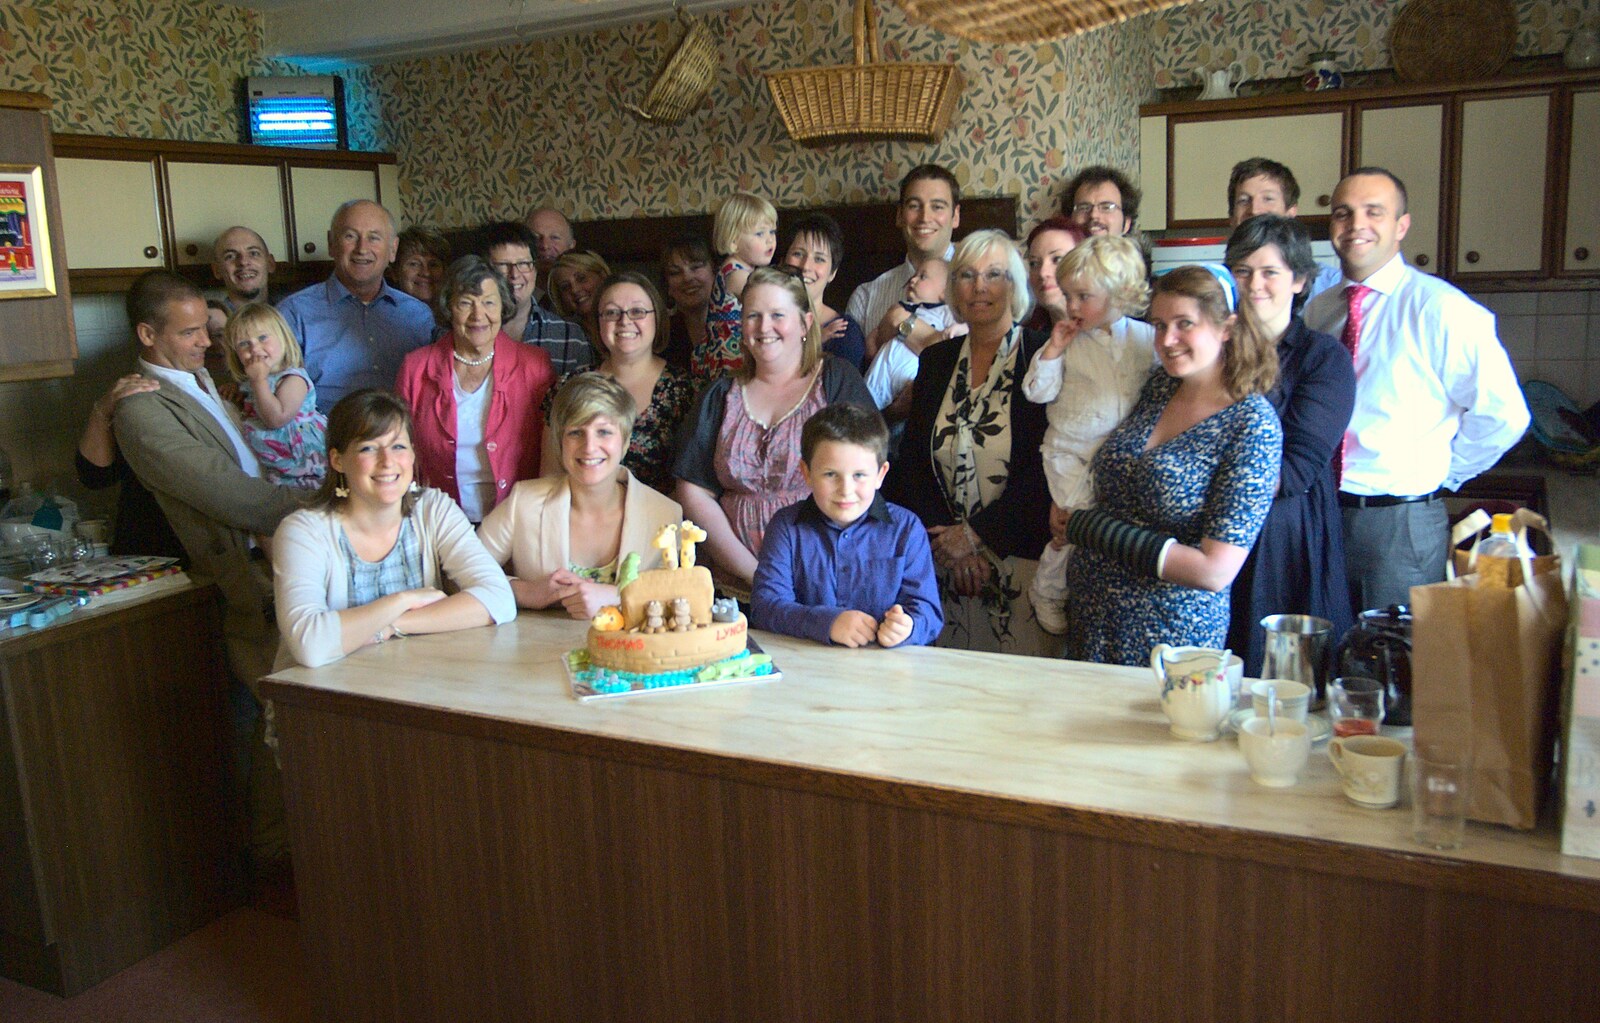 A group family photo from A Christening, Wilford, Northamptonshire - 22nd May 2011